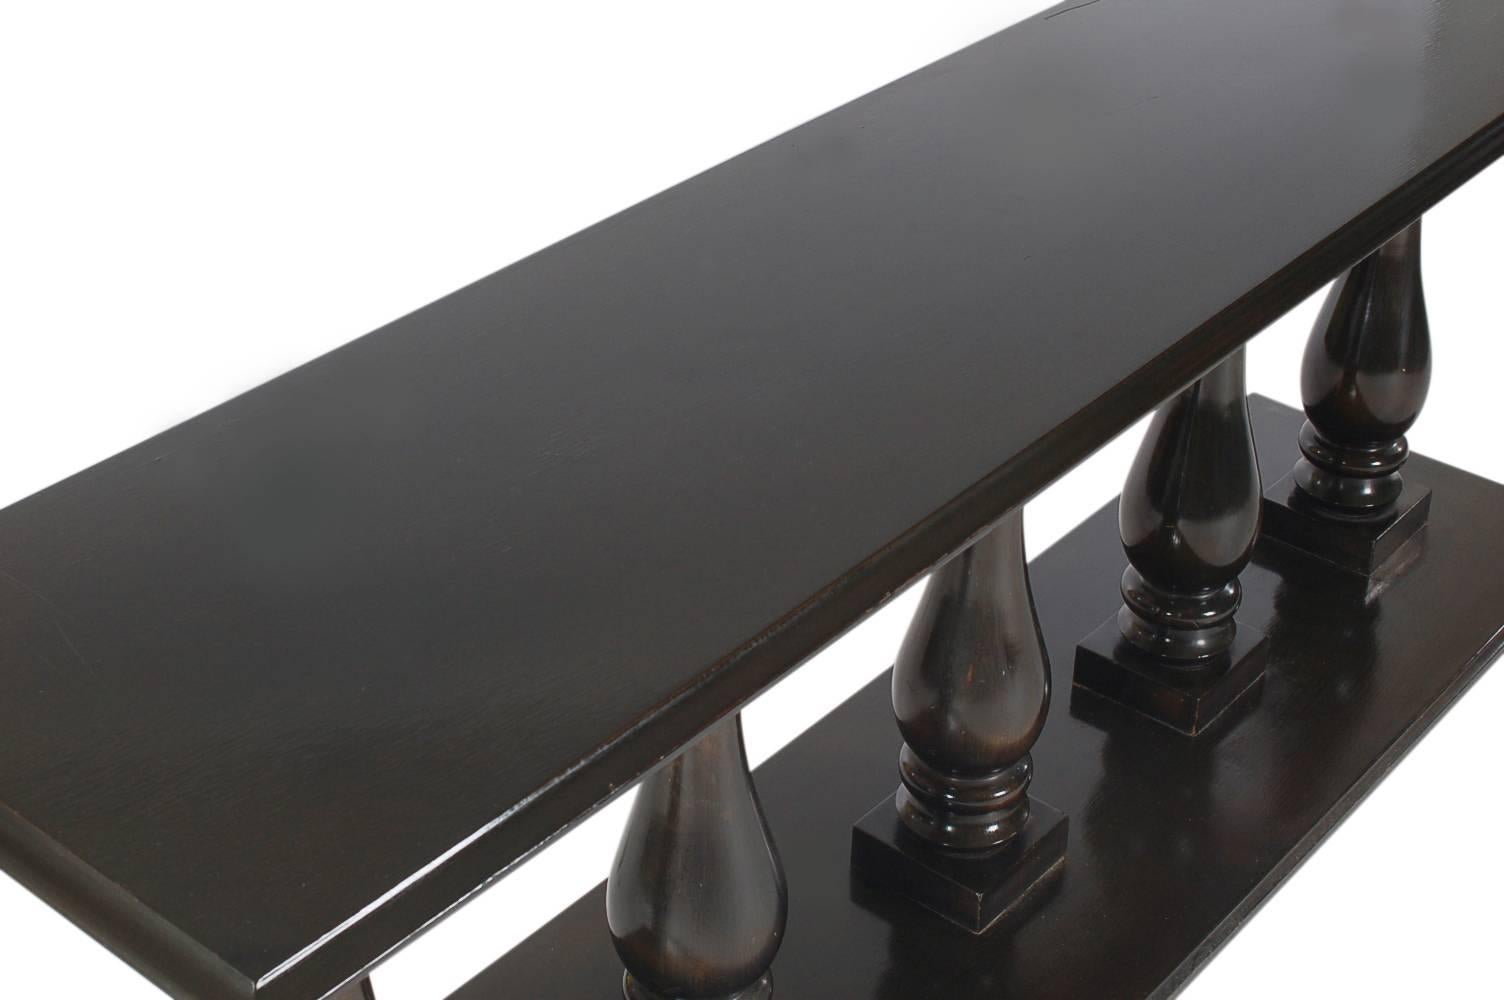 American Hollywood Regency Modern Black Console Table after Dorothy Draper / James Mont